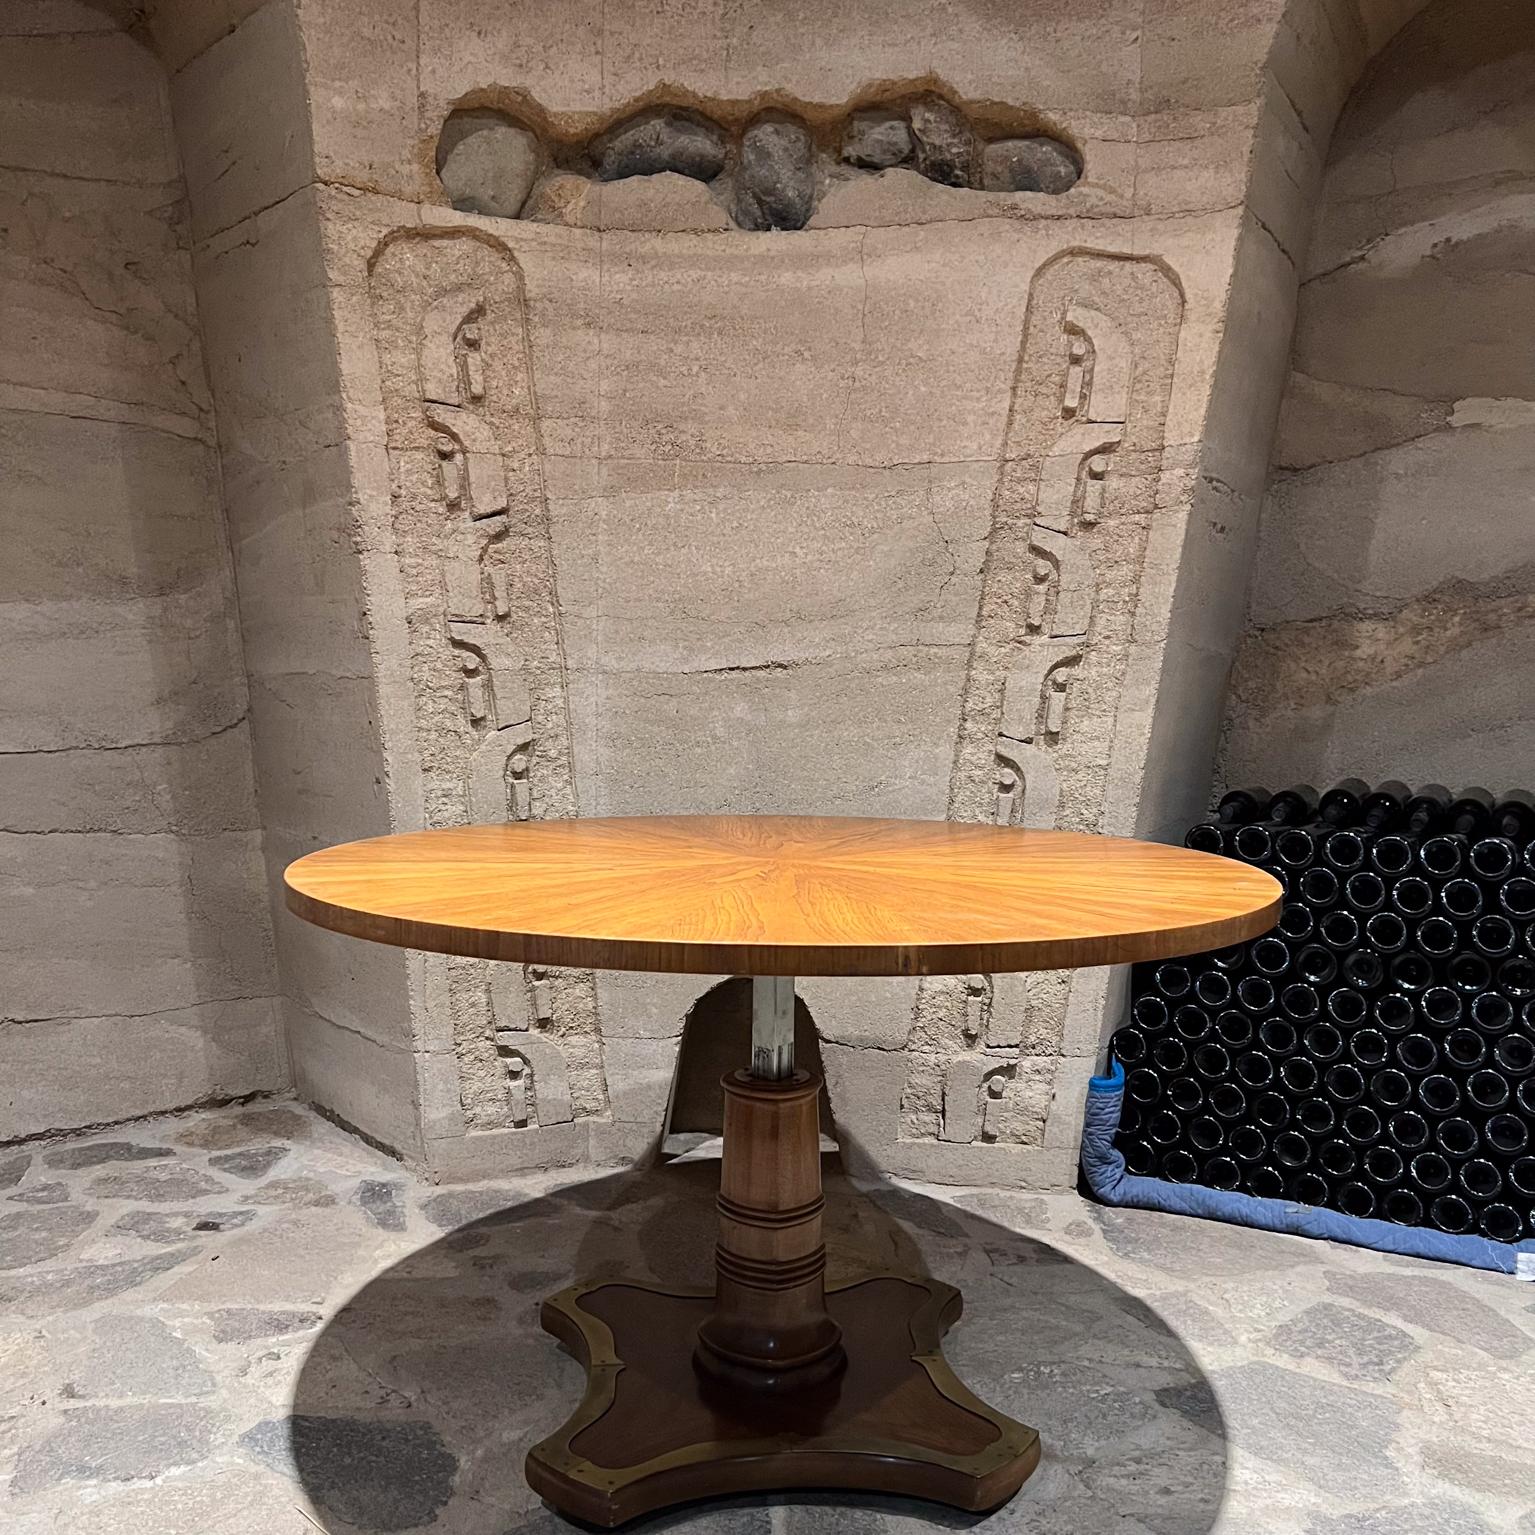 Adjustable Round Dining Table by Henredon
Walnut Wood pedestal base with brass inserts.
Table has a lever under the top. Functions up and down.
Stamped by Henredon Stamp 40-5705
48 diameter x 22 h at lowest up to 29 h
Preowned vintage unrestored